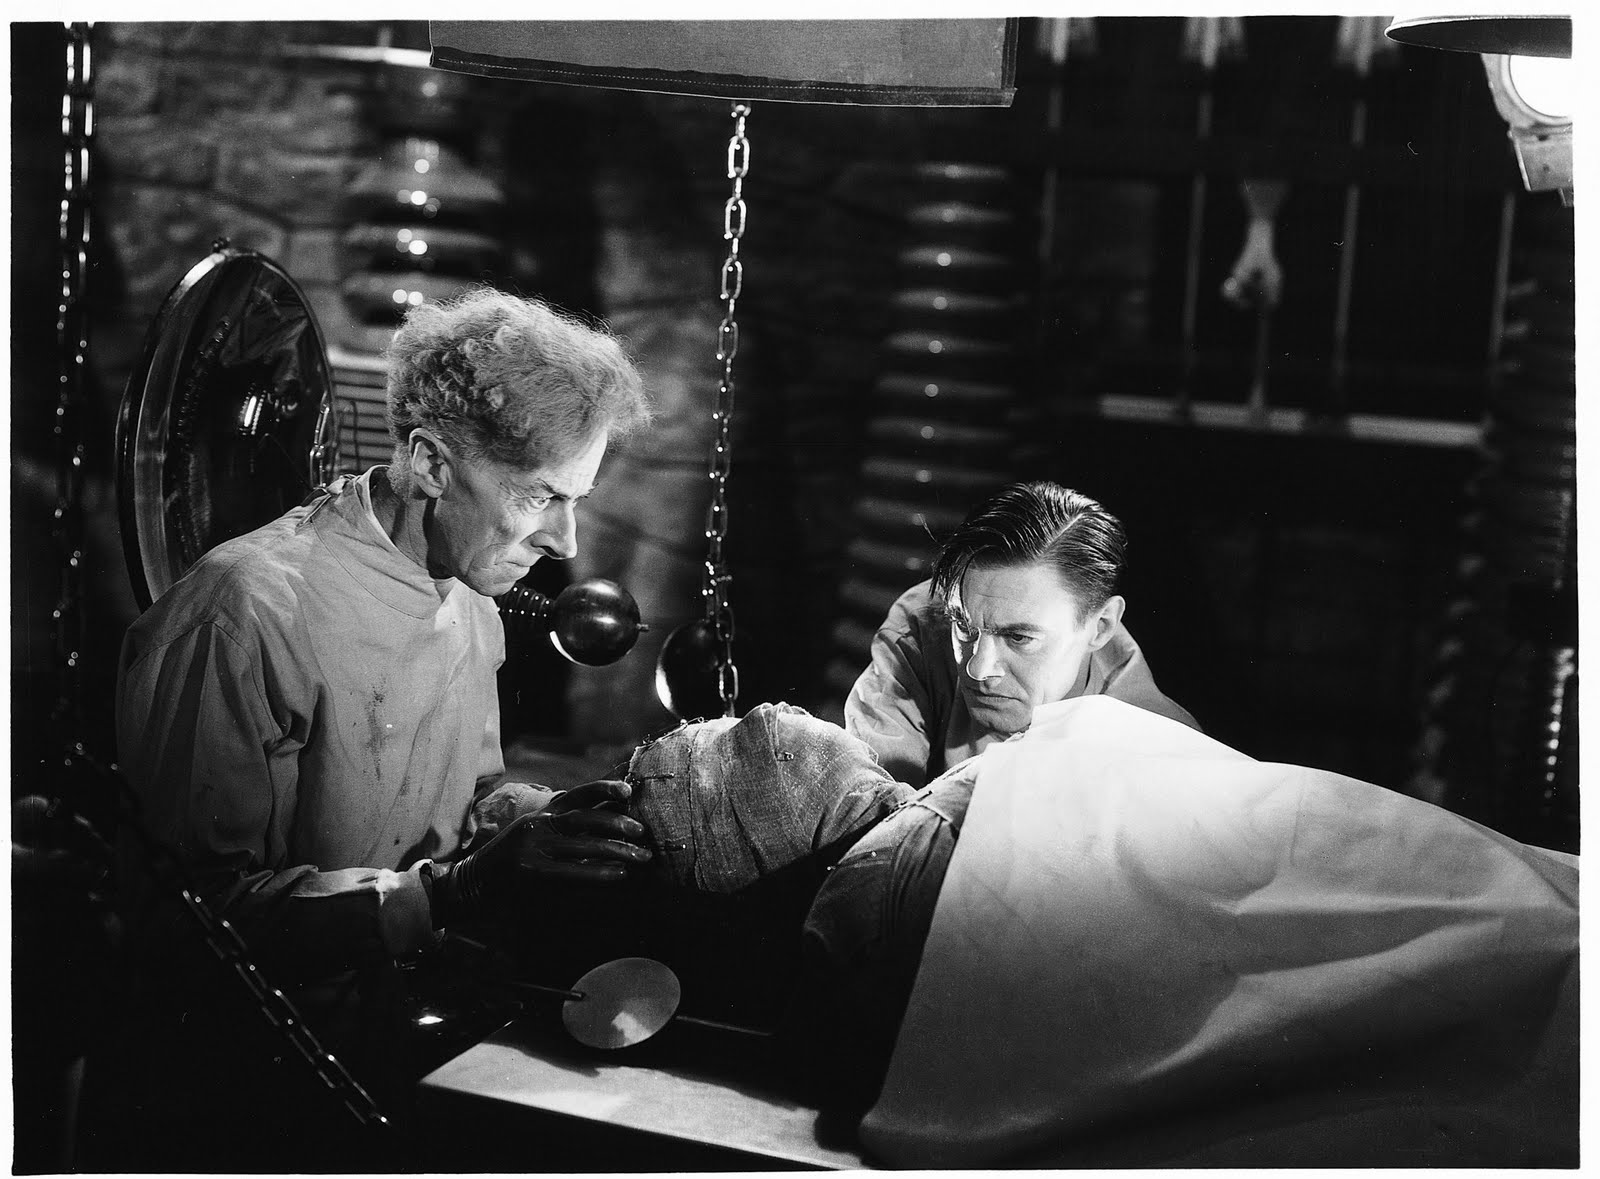 Image from the movie 'Bride of Frankenstein'